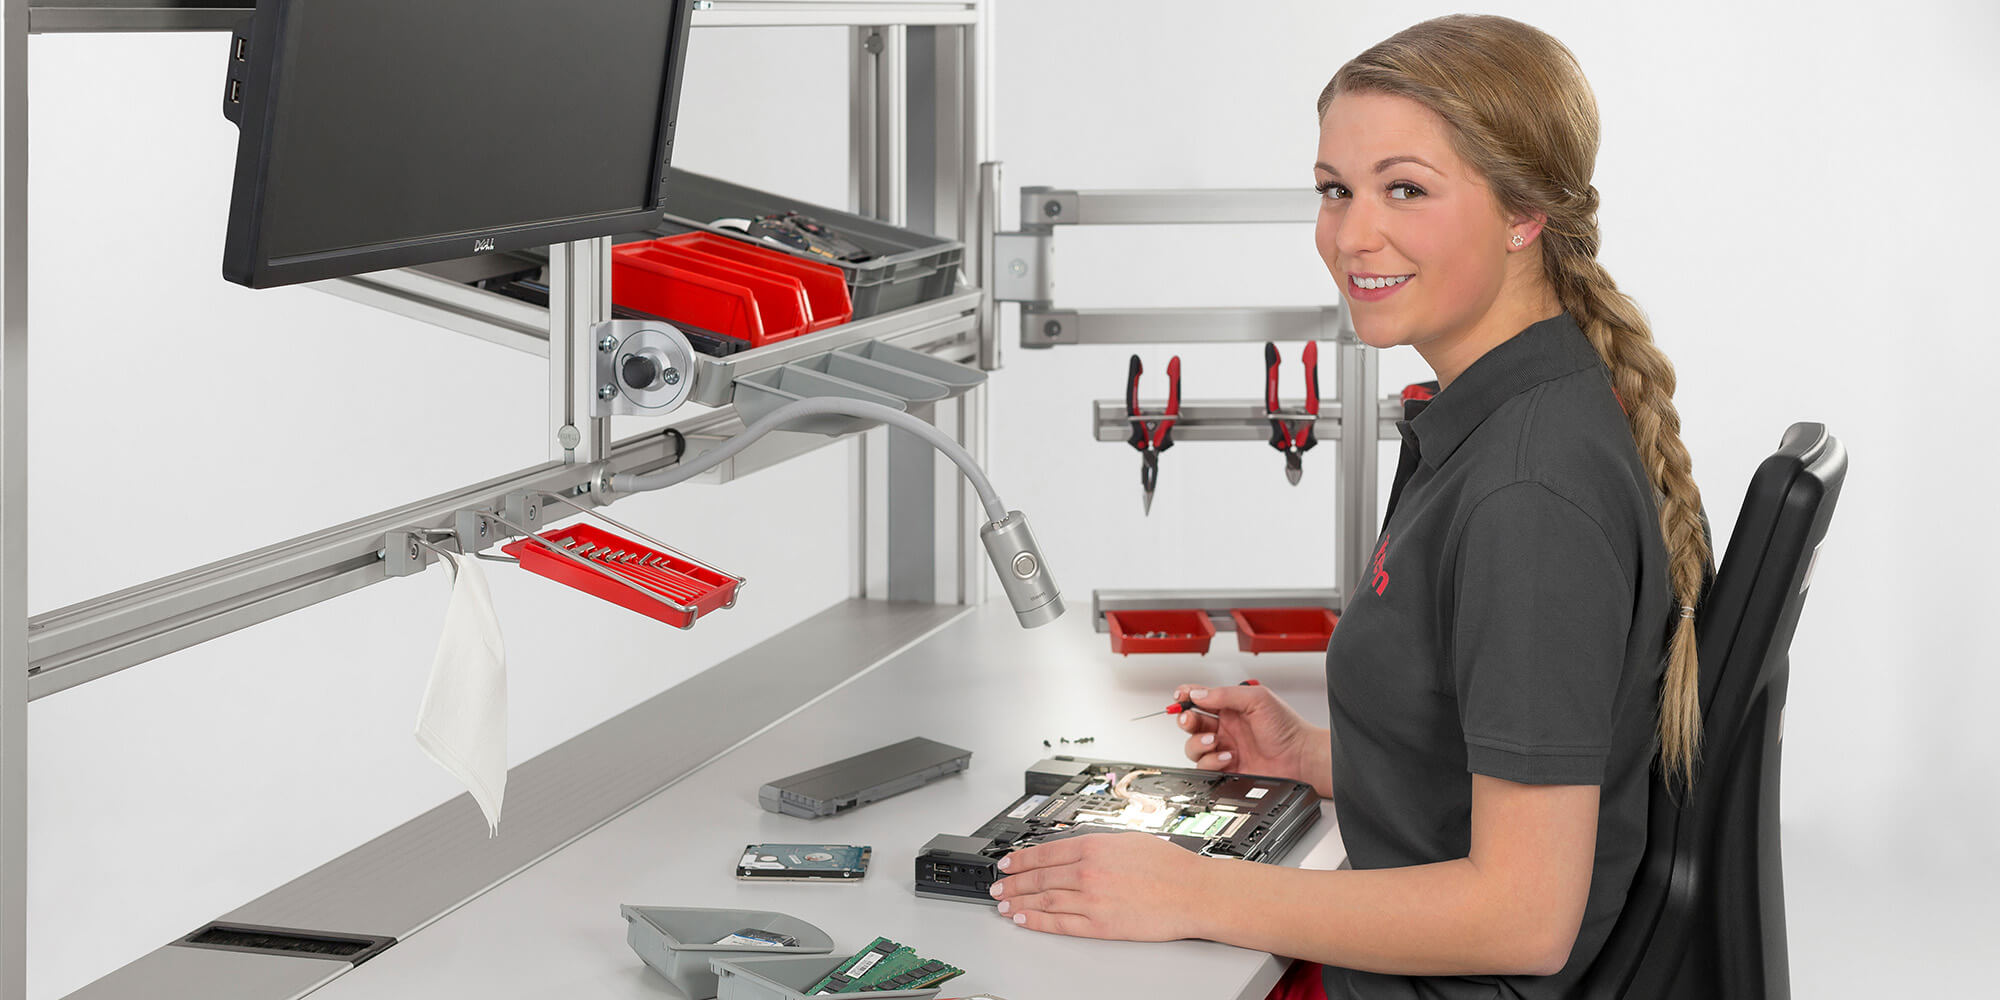 Why an ergonomic assembly work bench is a must